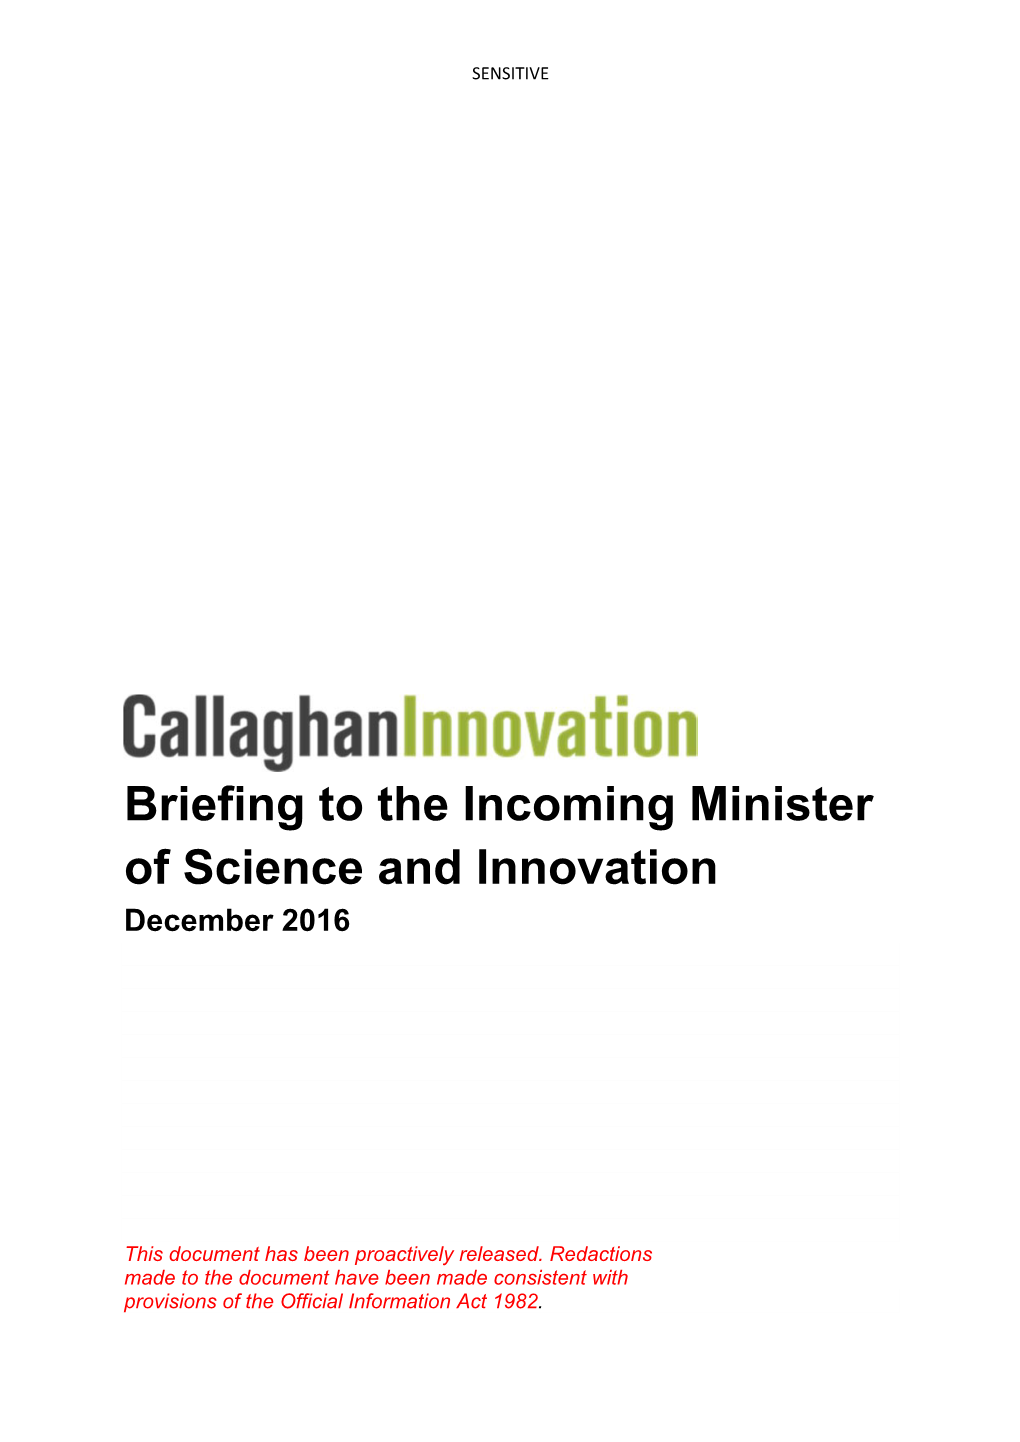 Callaghan Innovation Briefing to the Incoming Minister. December 2016. (Redacted)